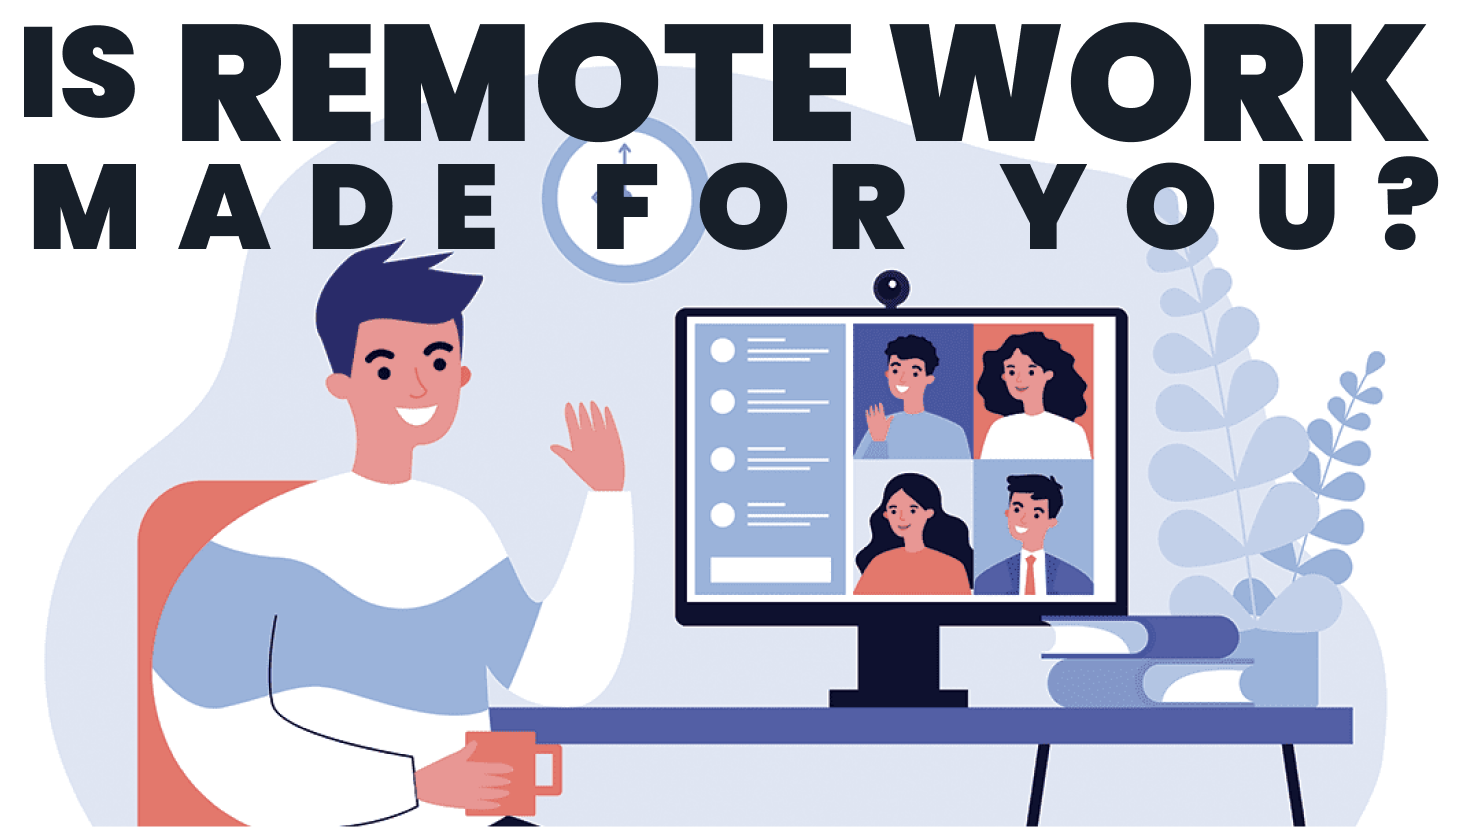 Is remote work made for you?